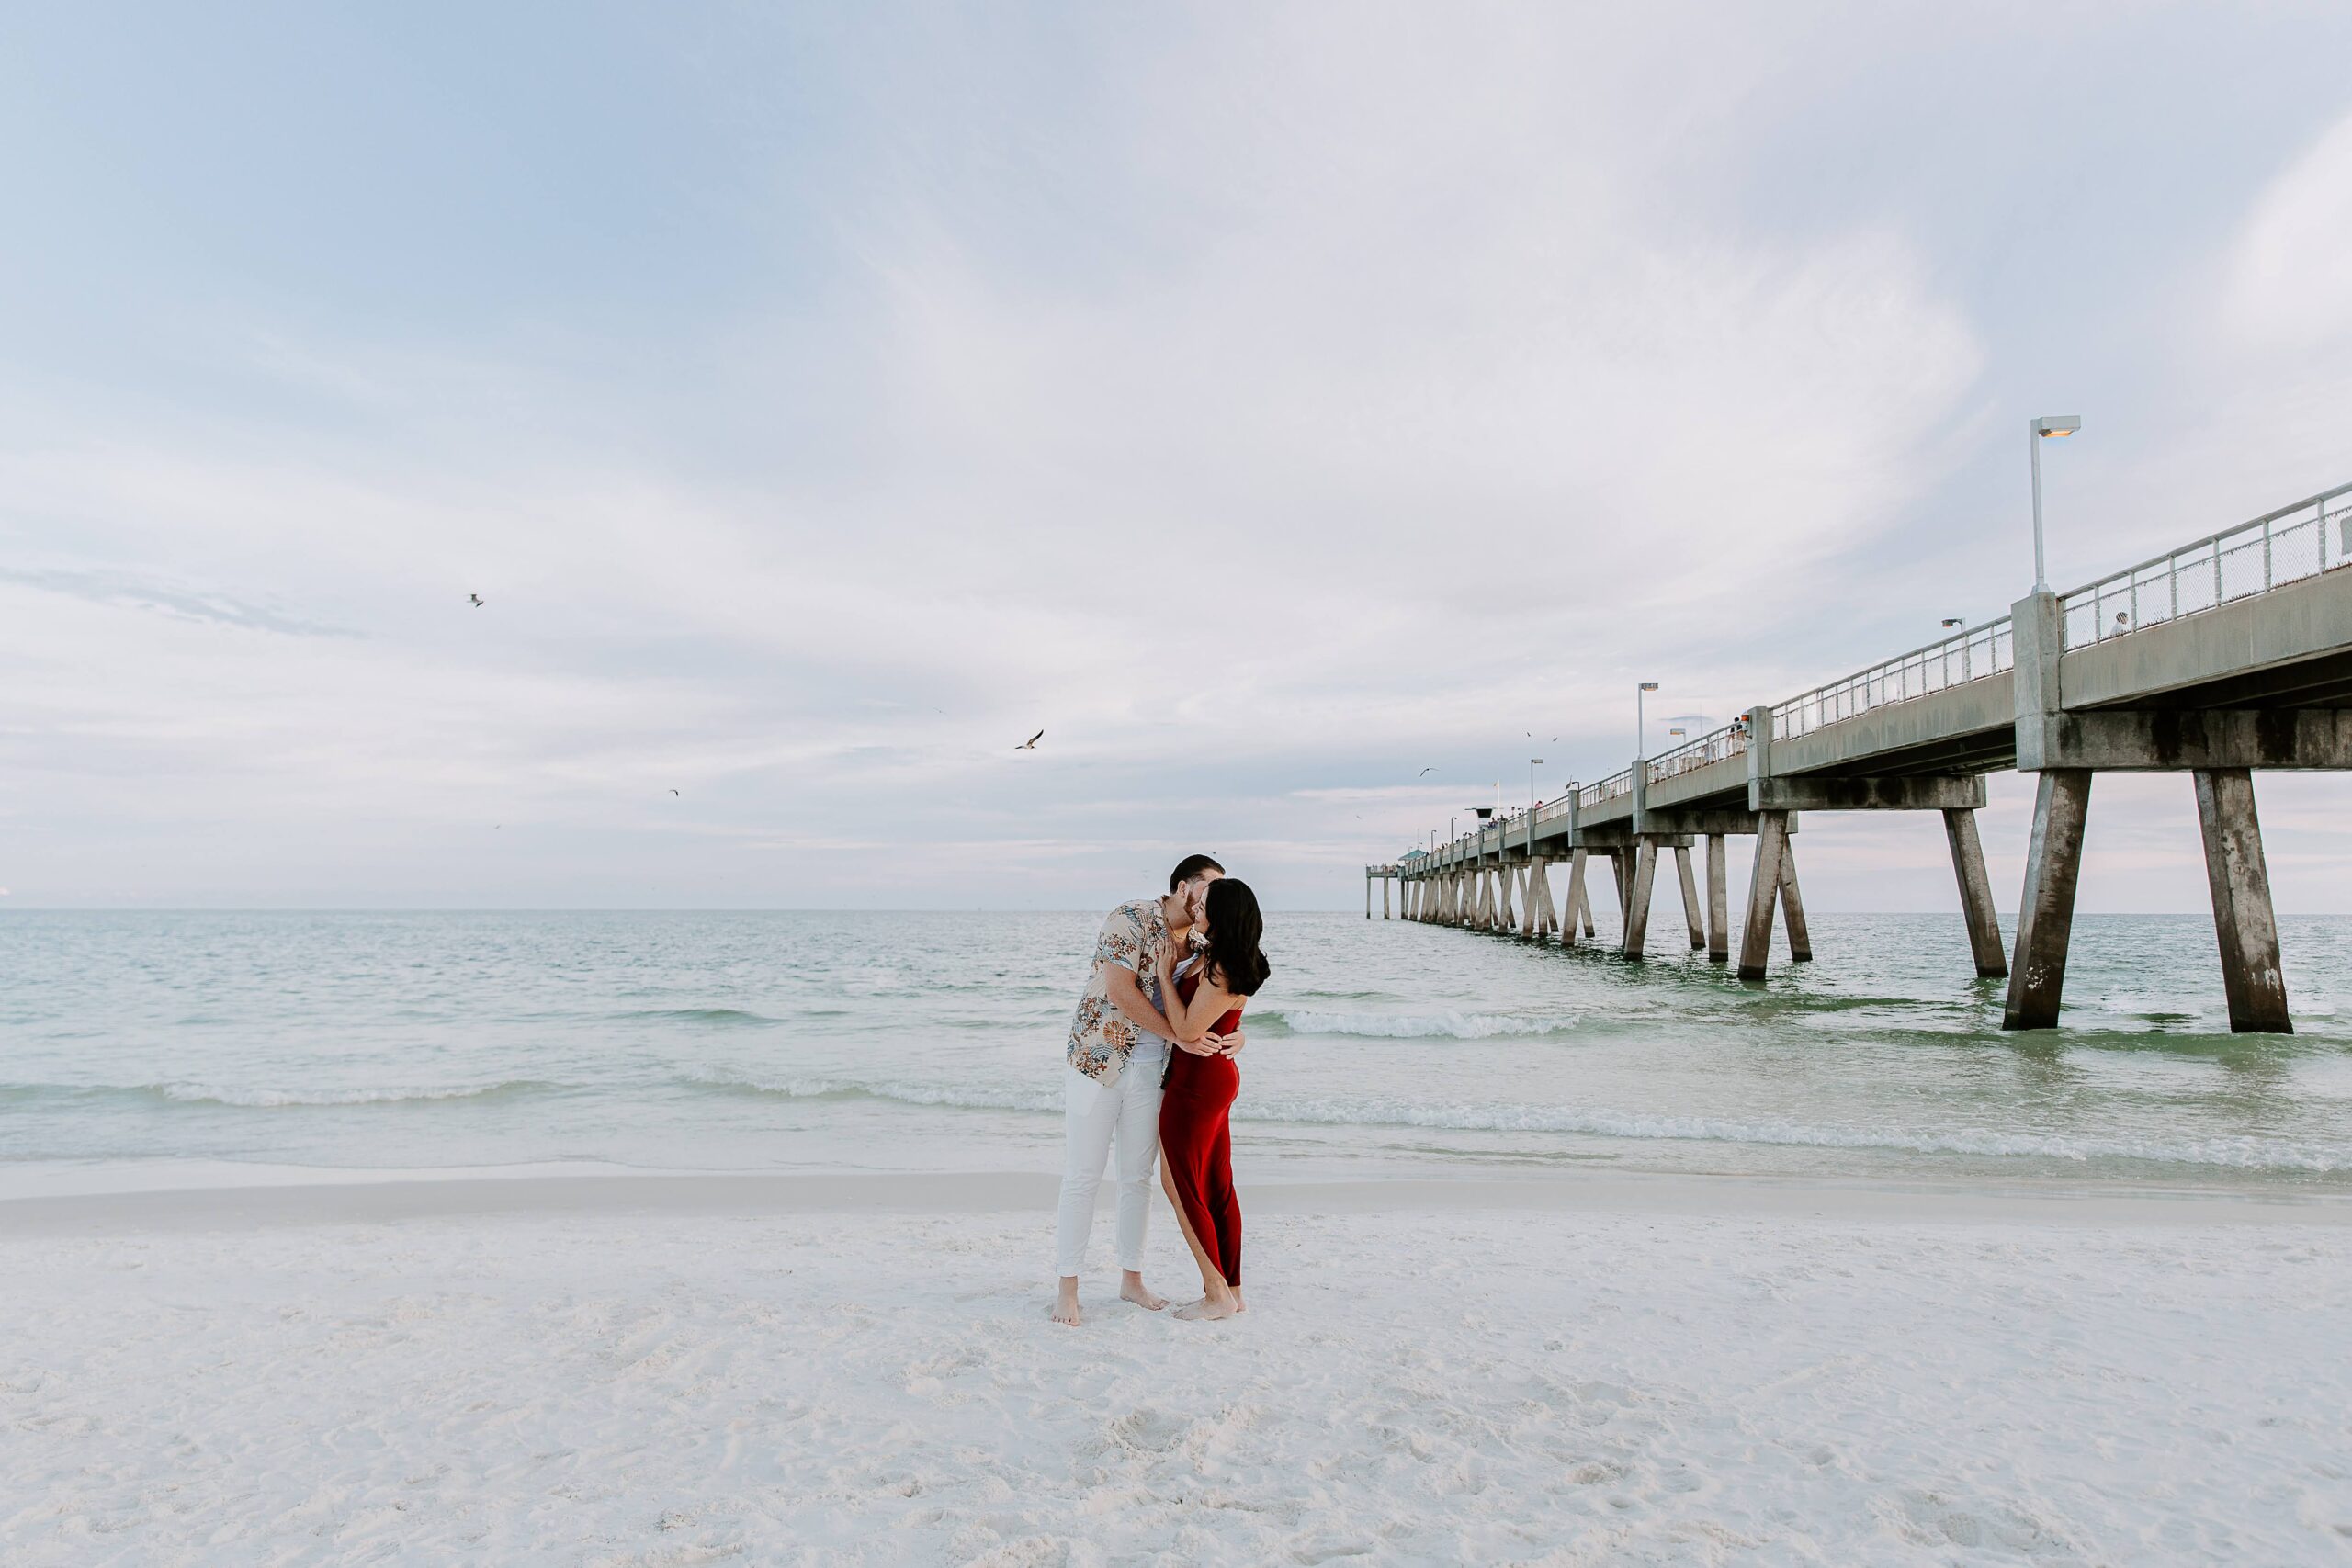 A woman embracing with her partner as the sun sets and the birds fly overhead during their beach engagement photos in Destin